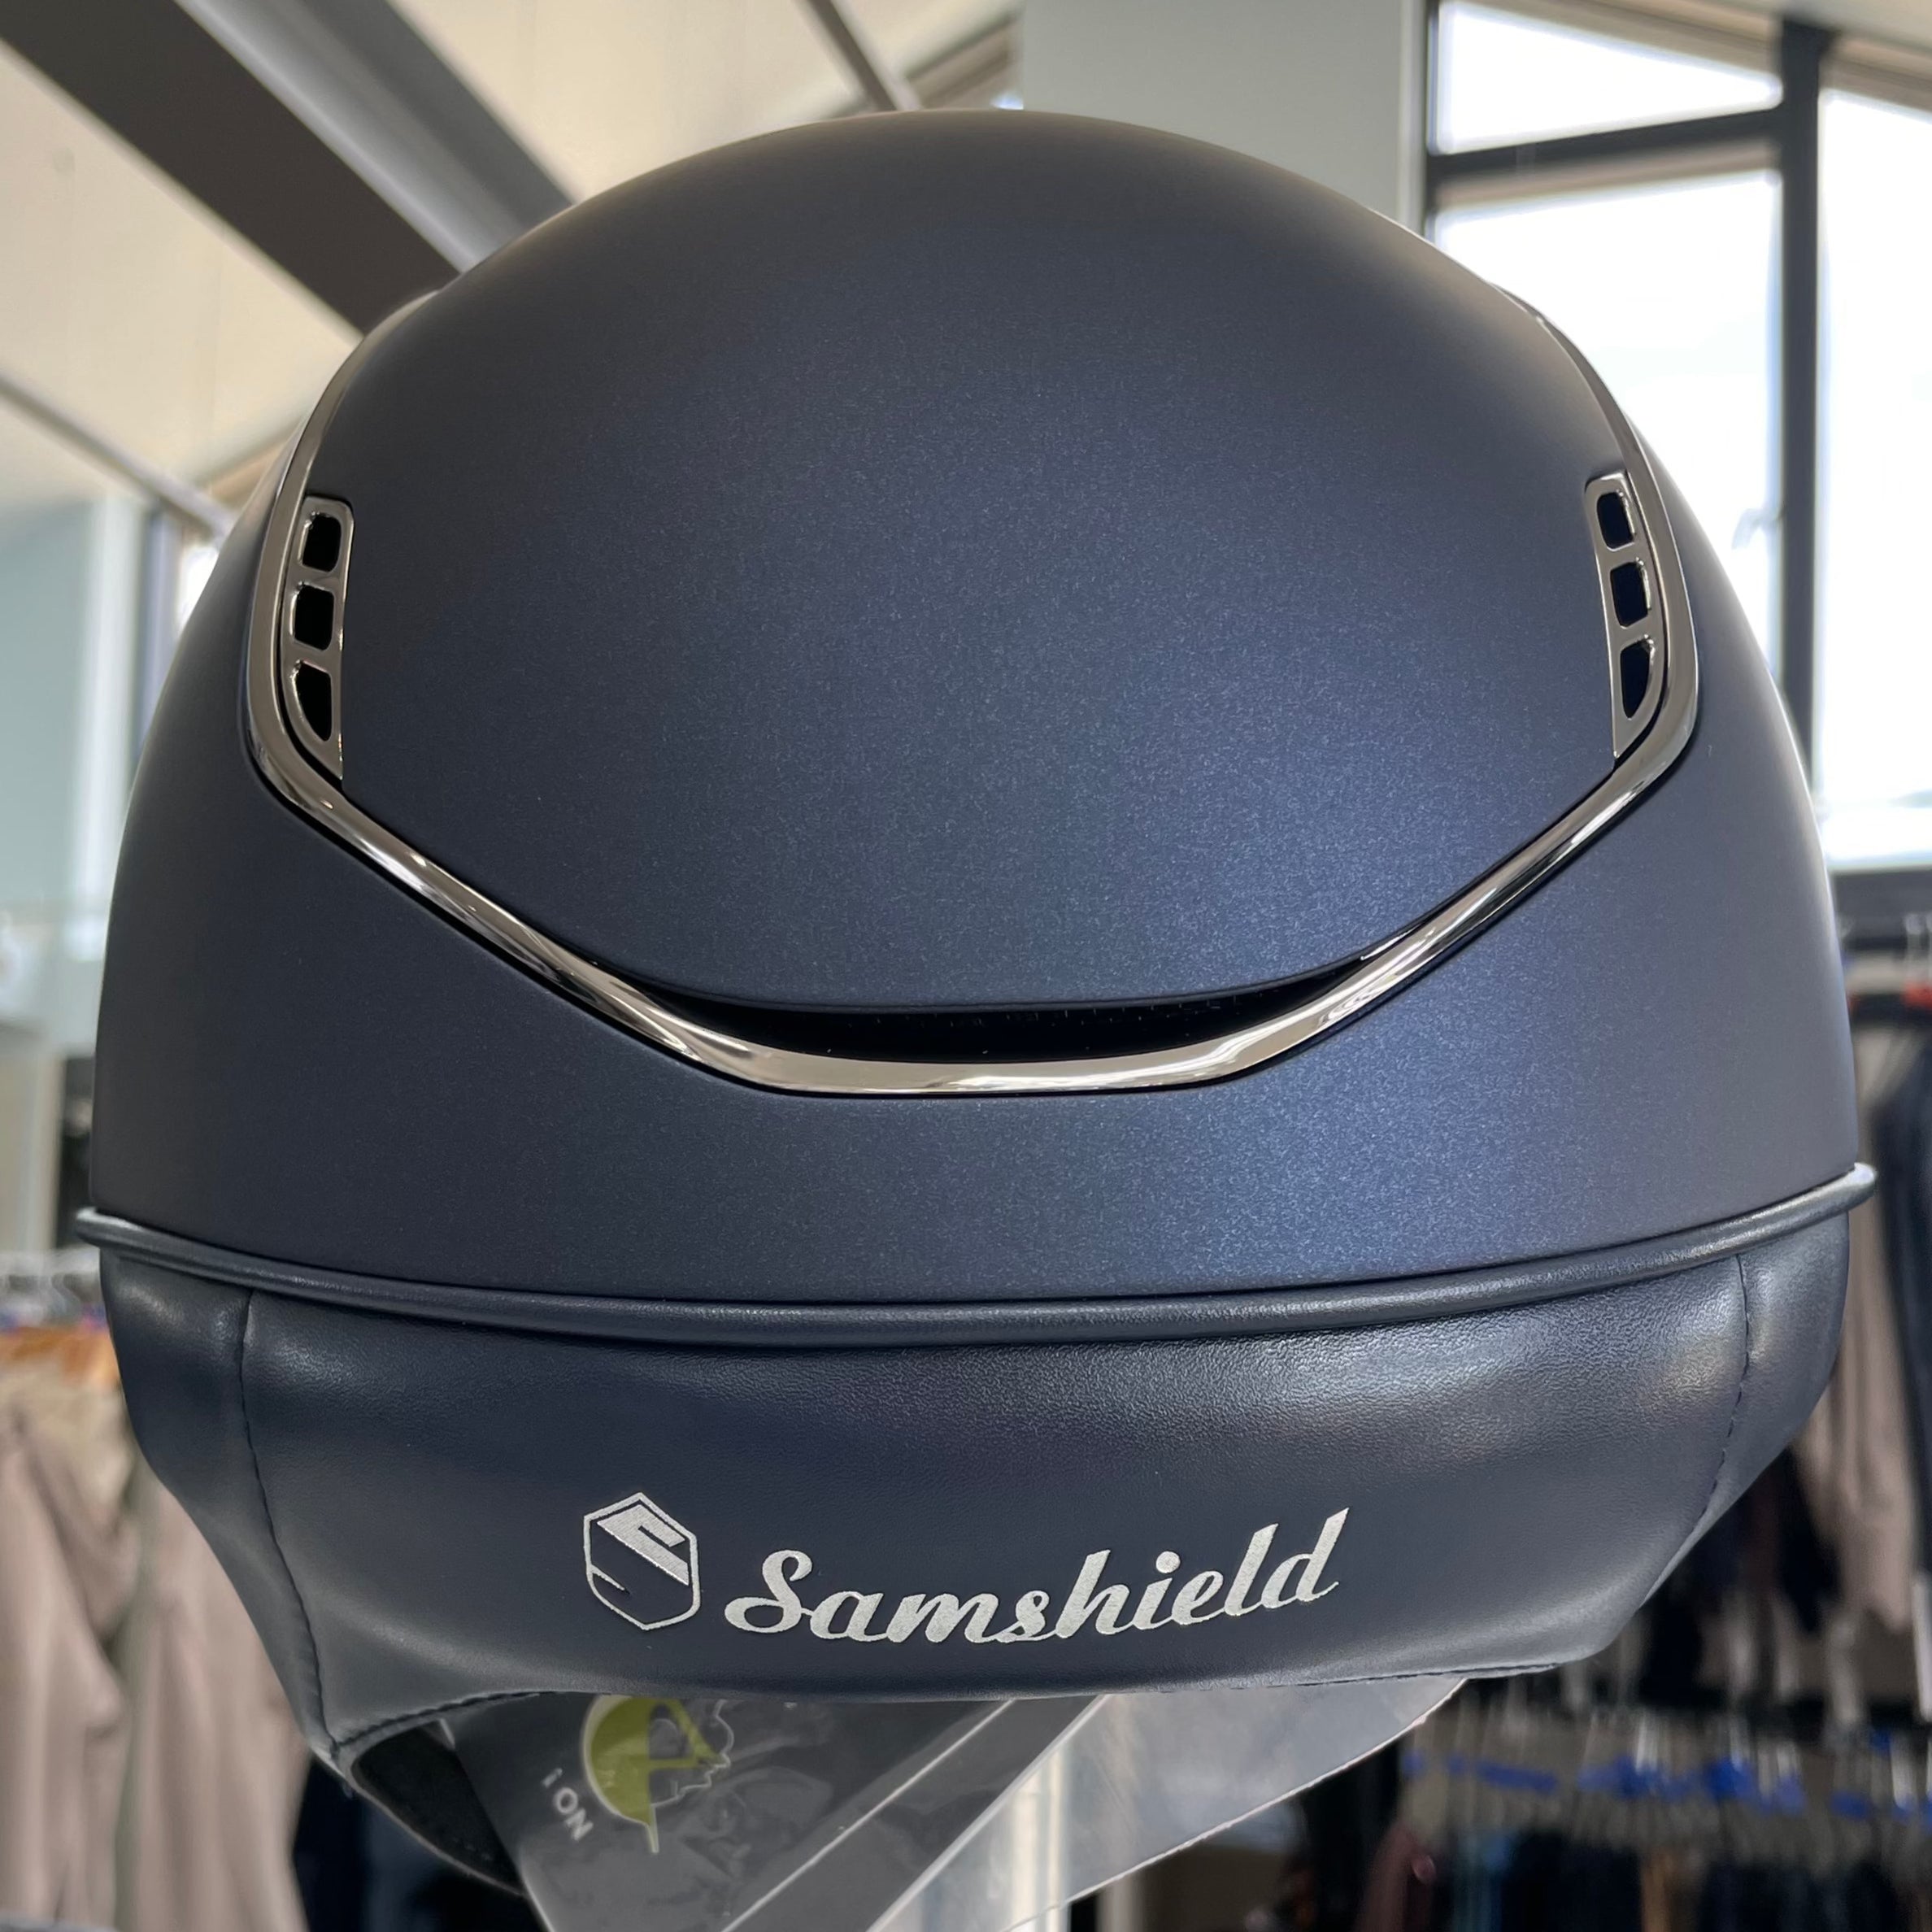 Samshield MissShield Blue with paradise shine badge and frontal band 2.0 (all sizes available)- in stock and ready to ship!